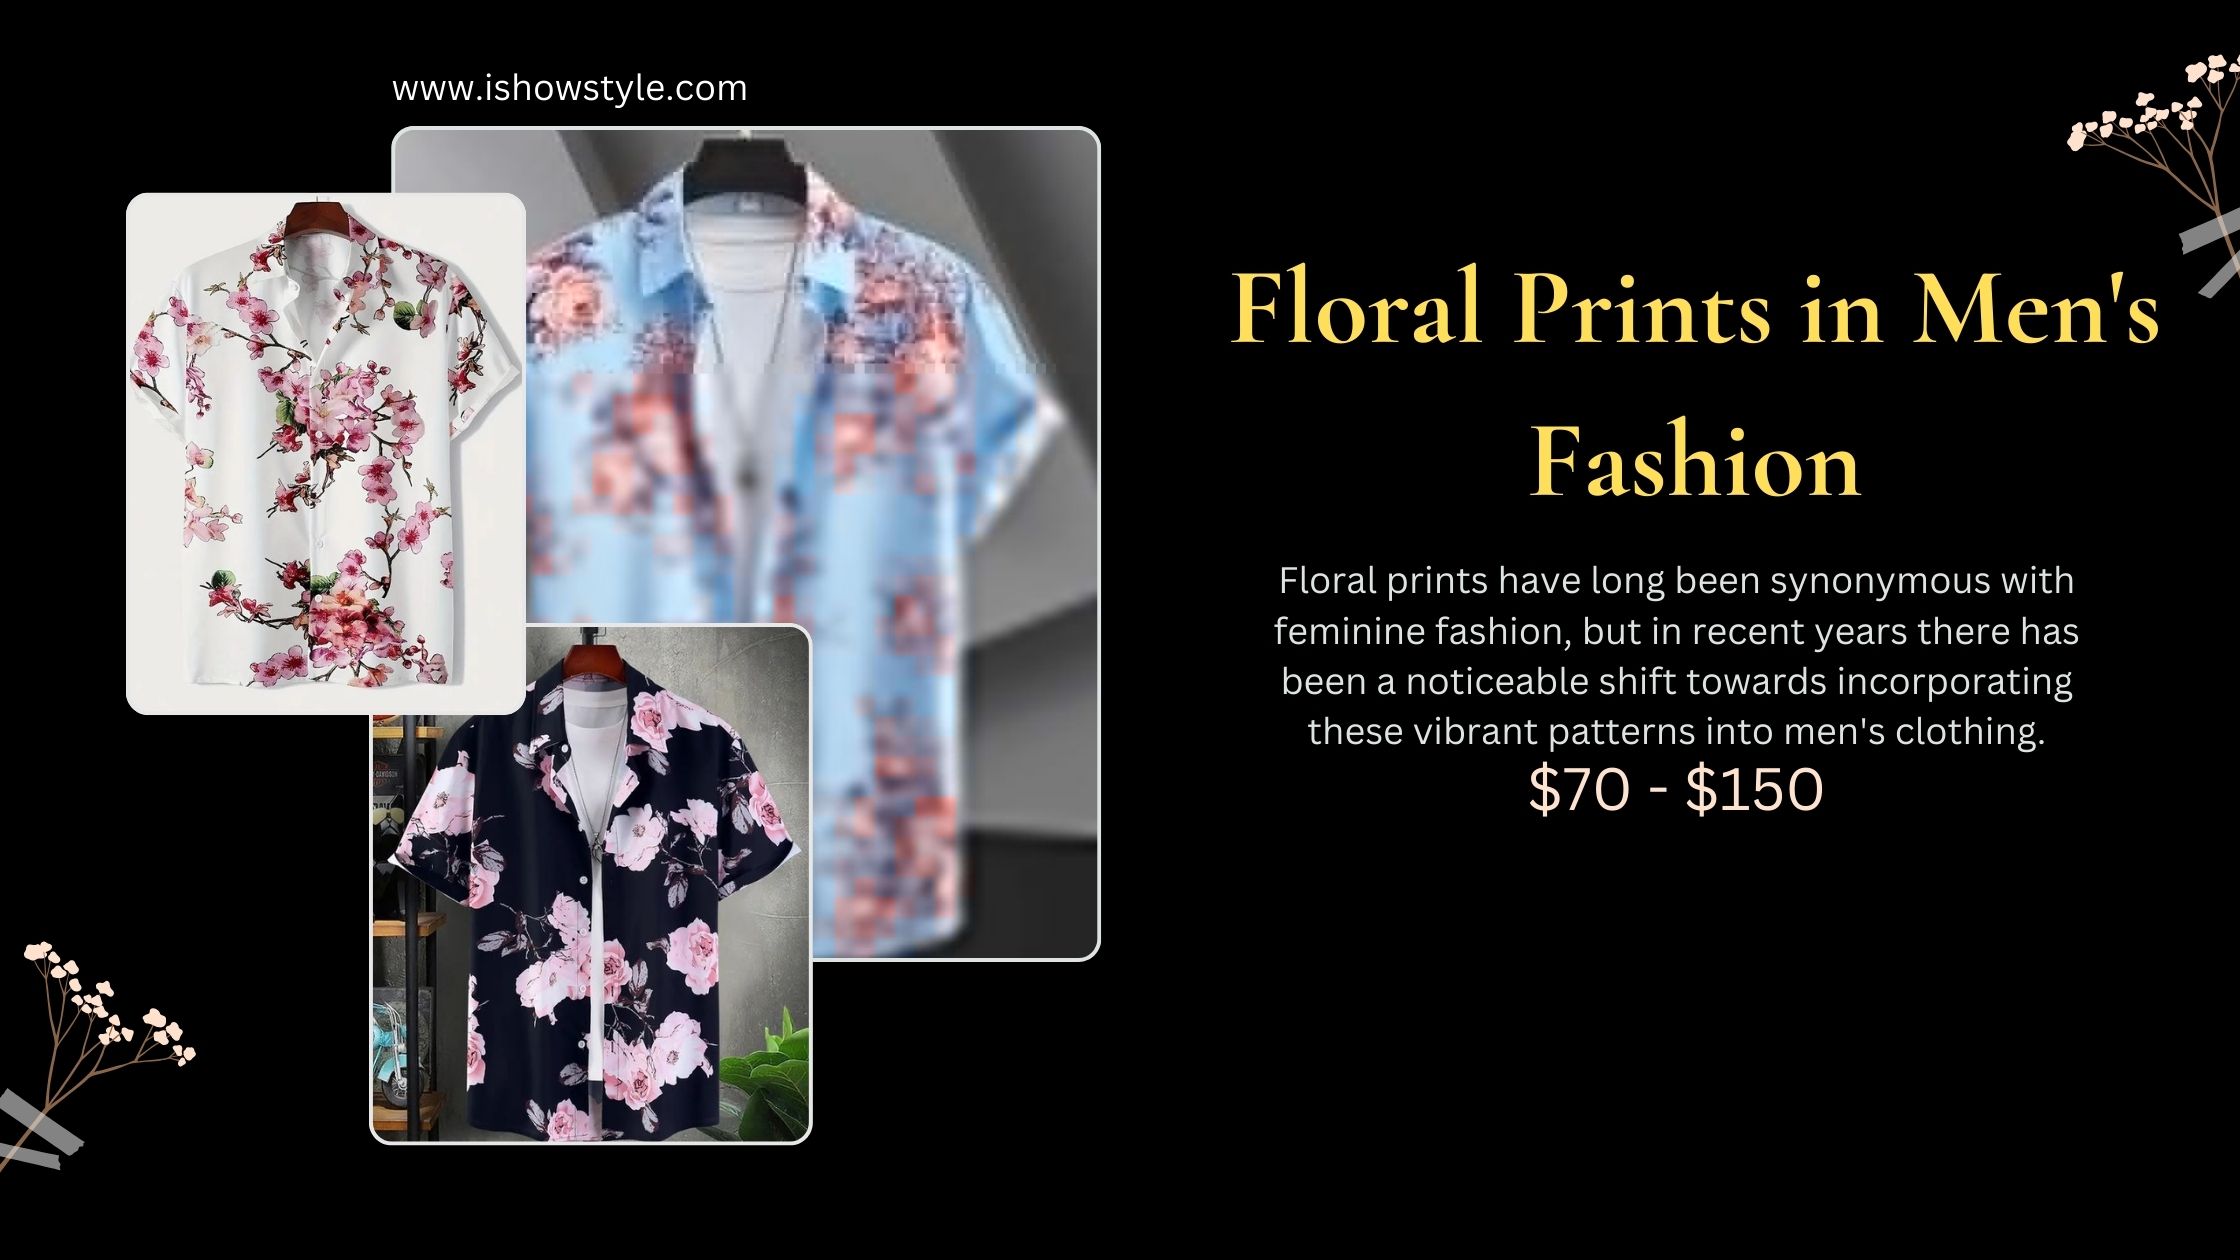 Embrace the floral trend this season